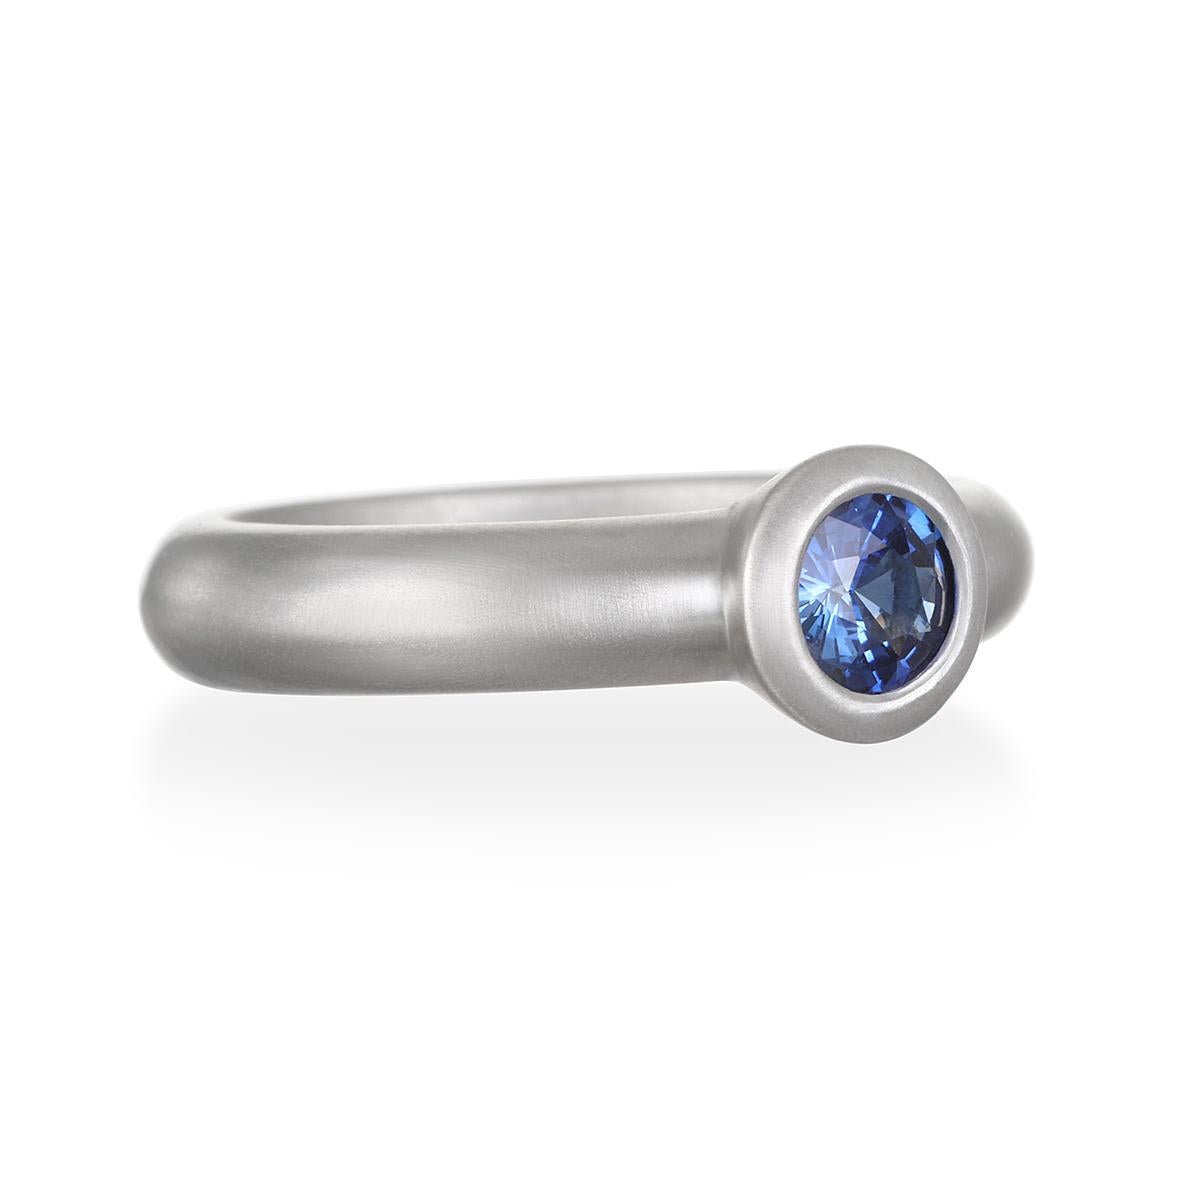 A beautiful, vivid shade of blue, this Ceylon Blue Sapphire ring is bezel set in platinum with a matte finish for a clean, timeless look. It can be worn alone as a statement piece or stacked with other rings. 

Sapphire:  1.0 Carat
Bezel Dimension